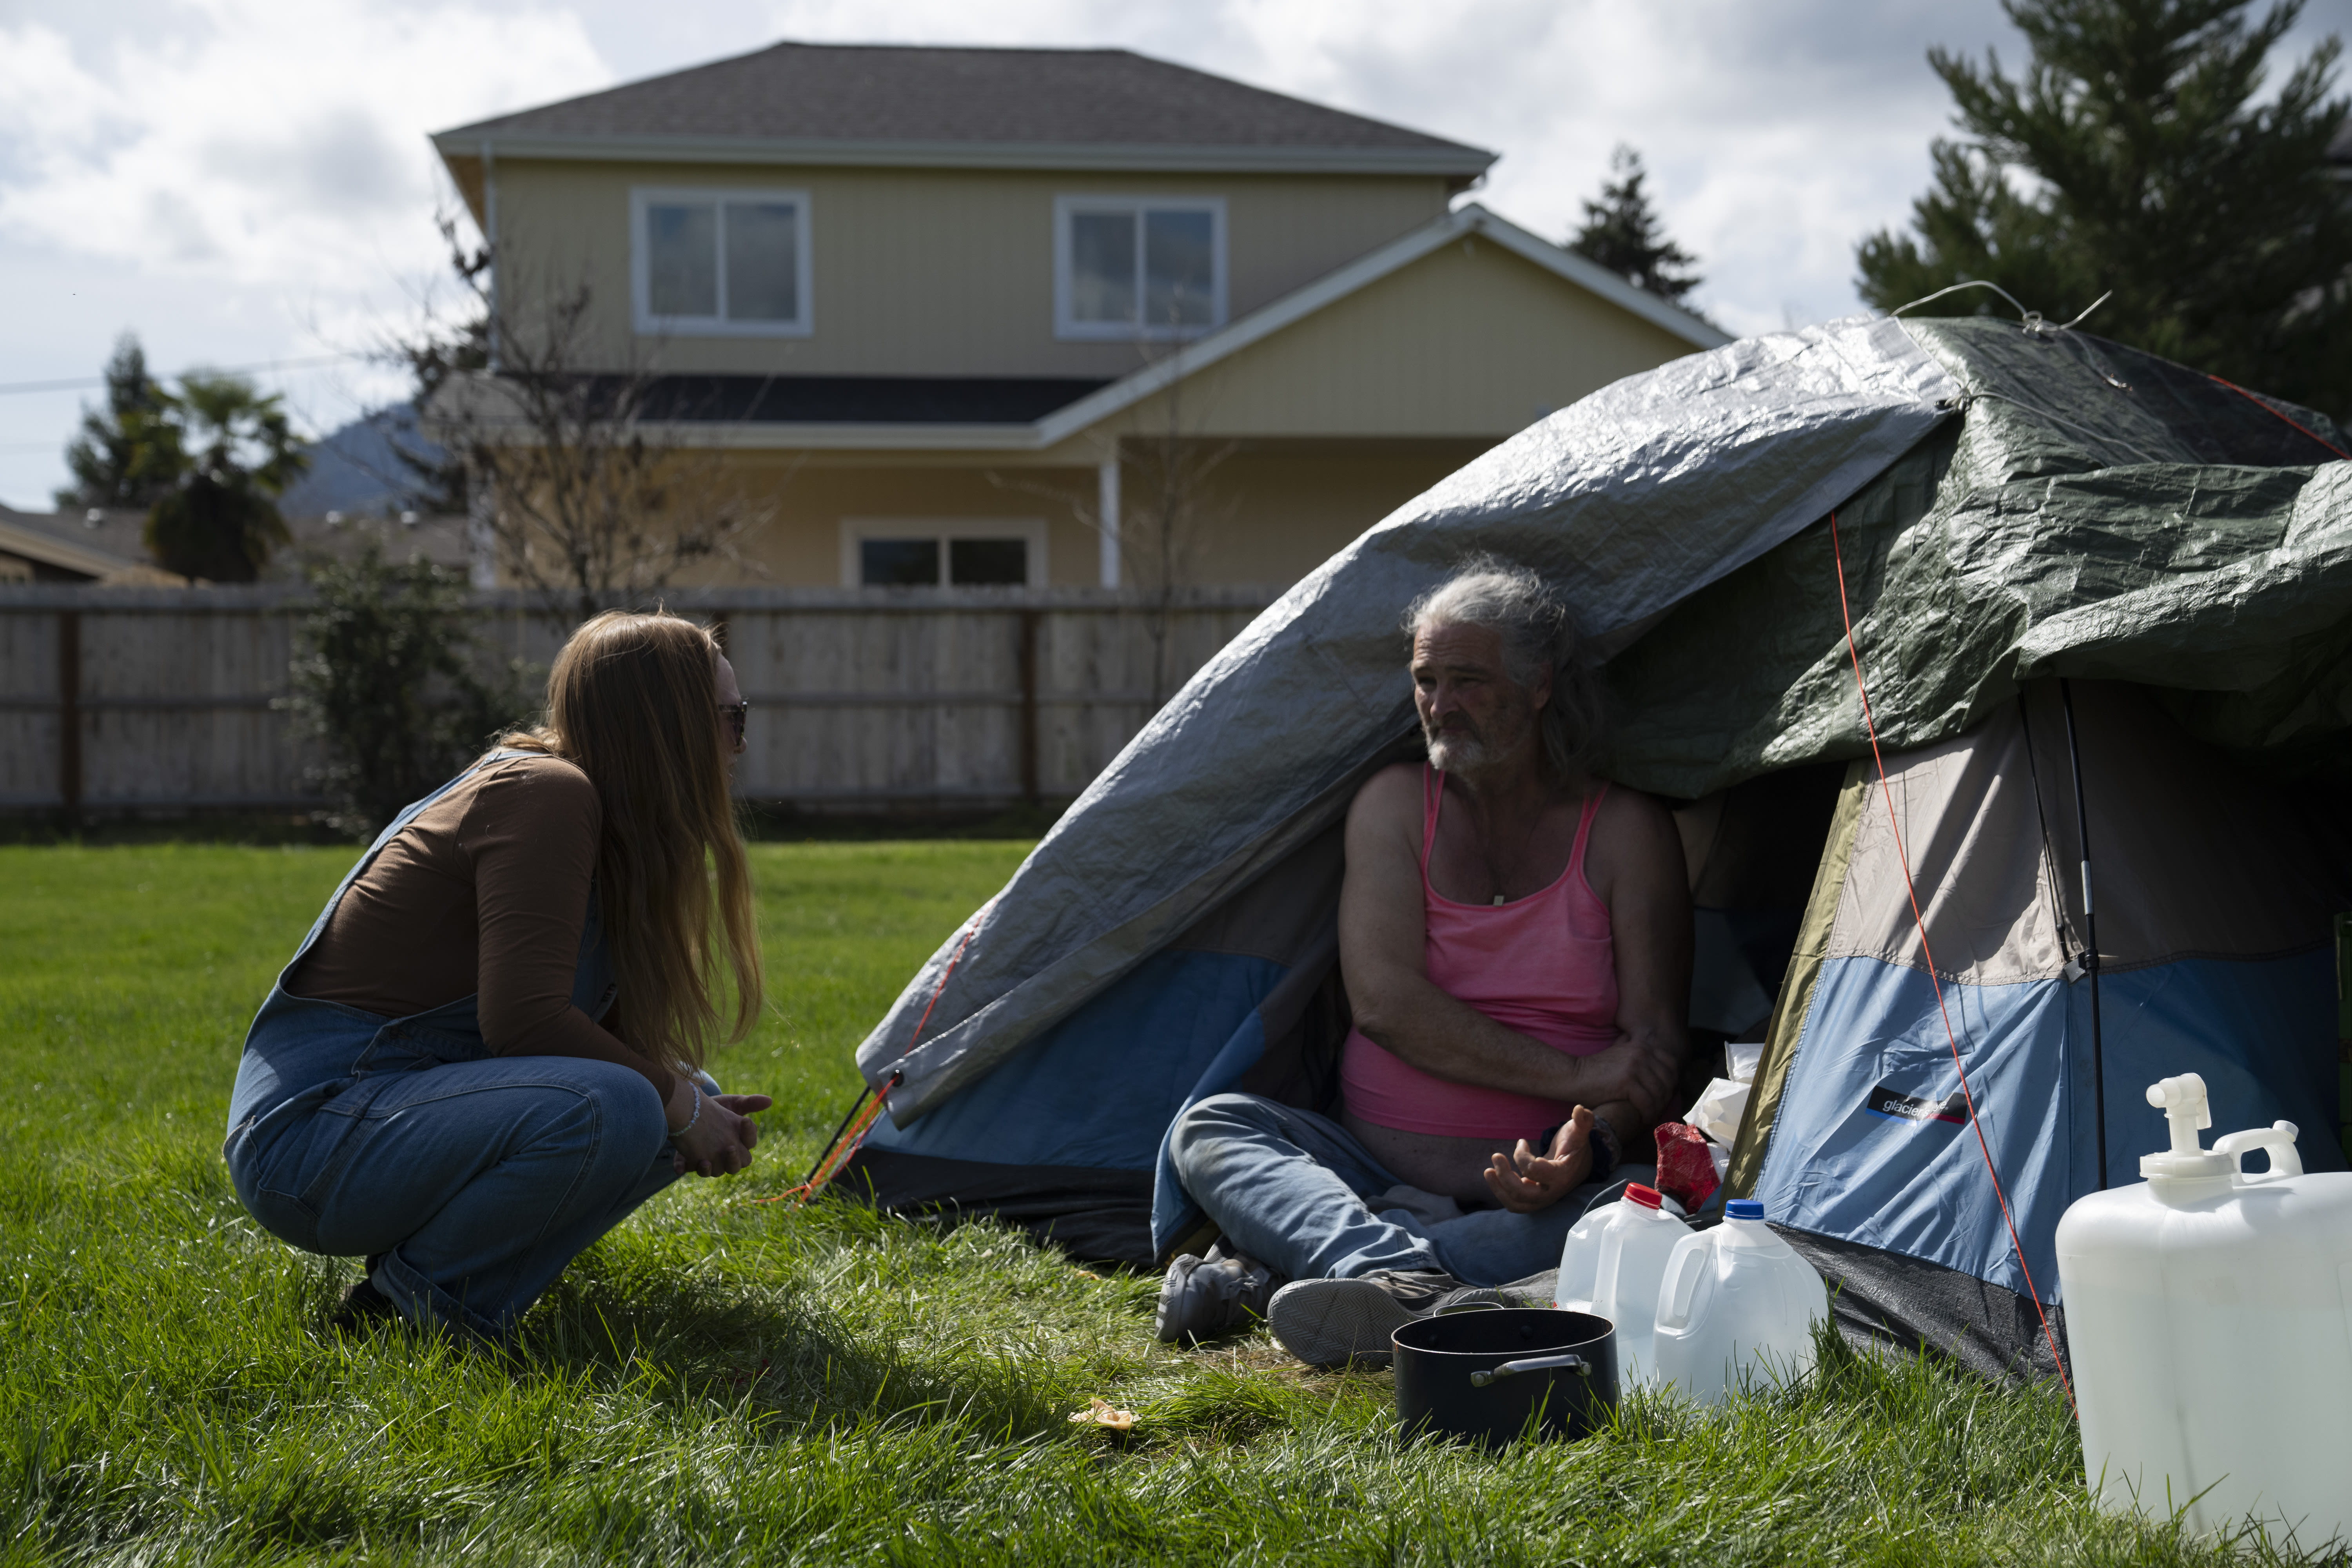 Divided Supreme Court rules in major homelessness case that outdoor sleeping bans are OK